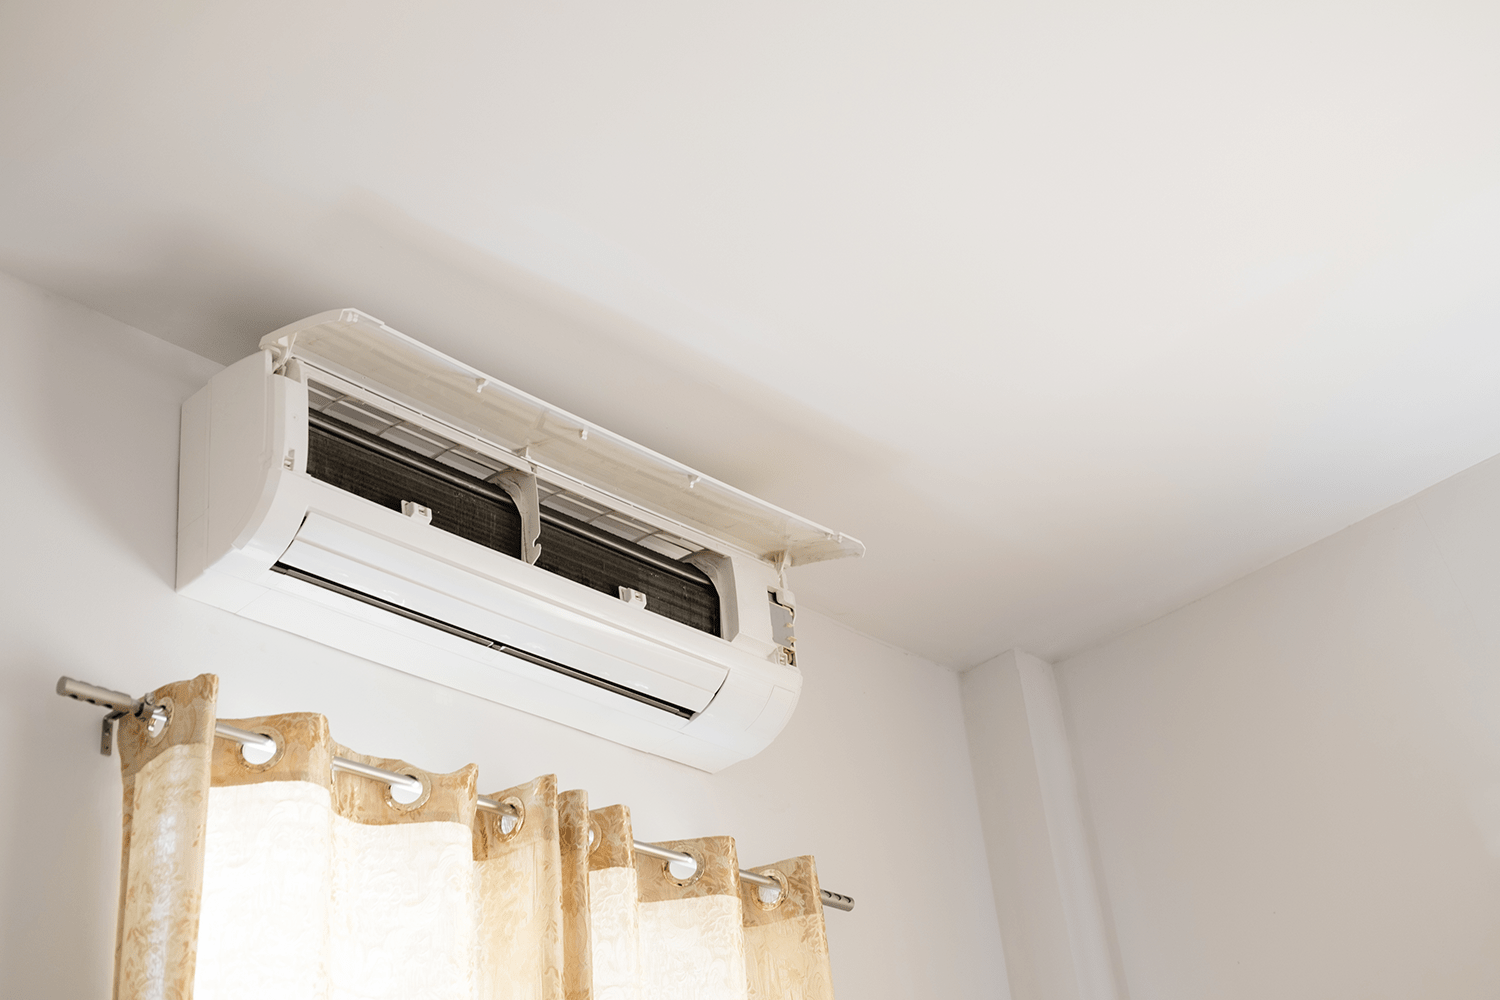 Opened cooling air conditioner household stock photo